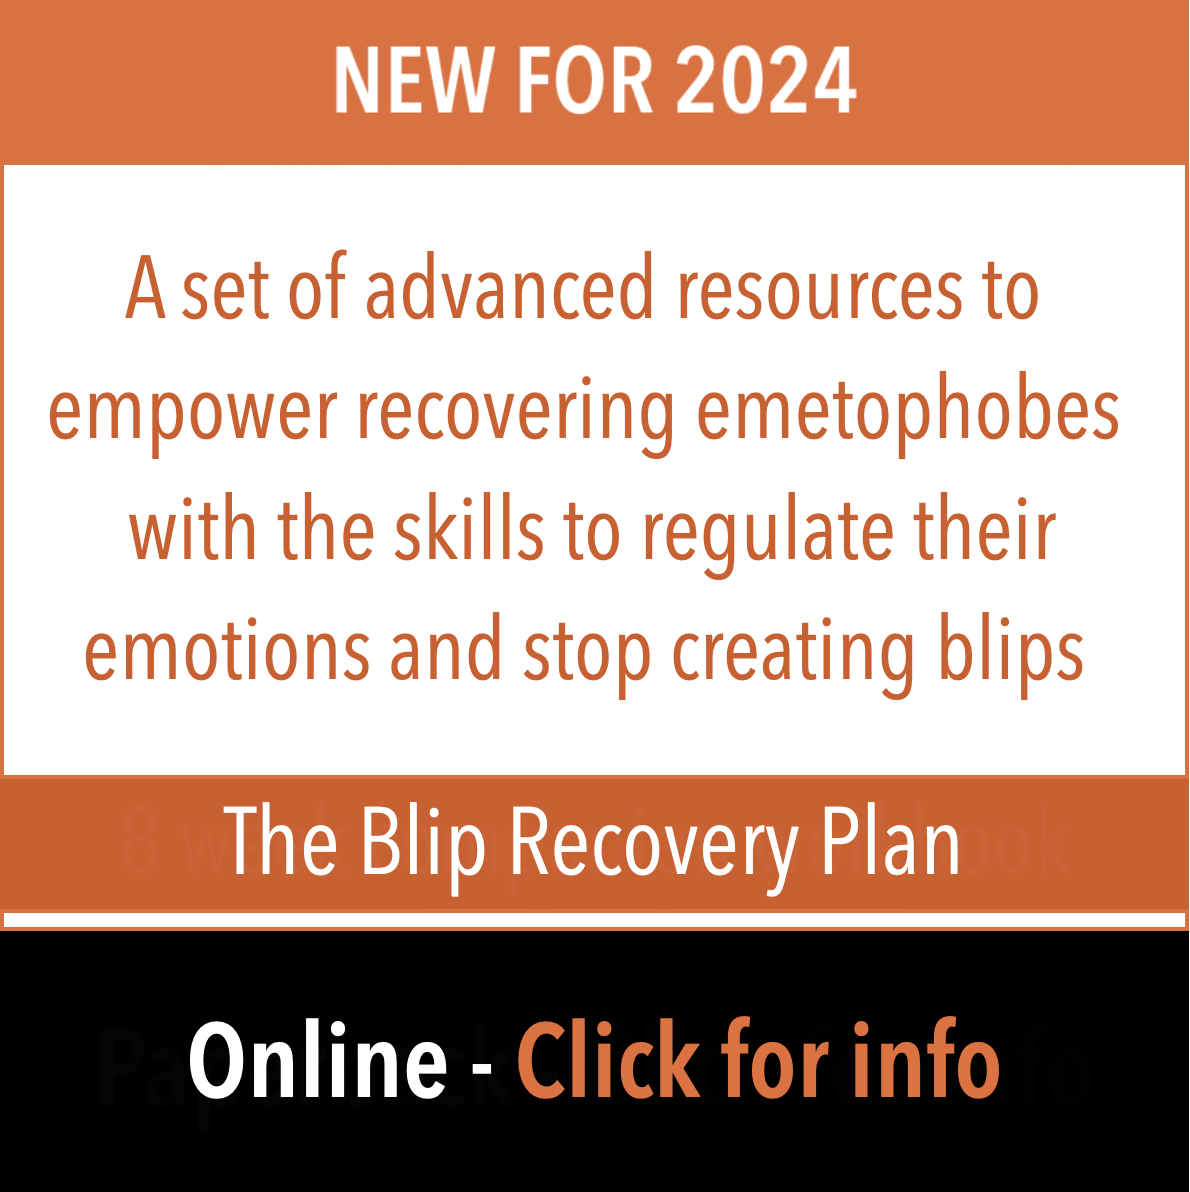 The Blip Recovery Plan